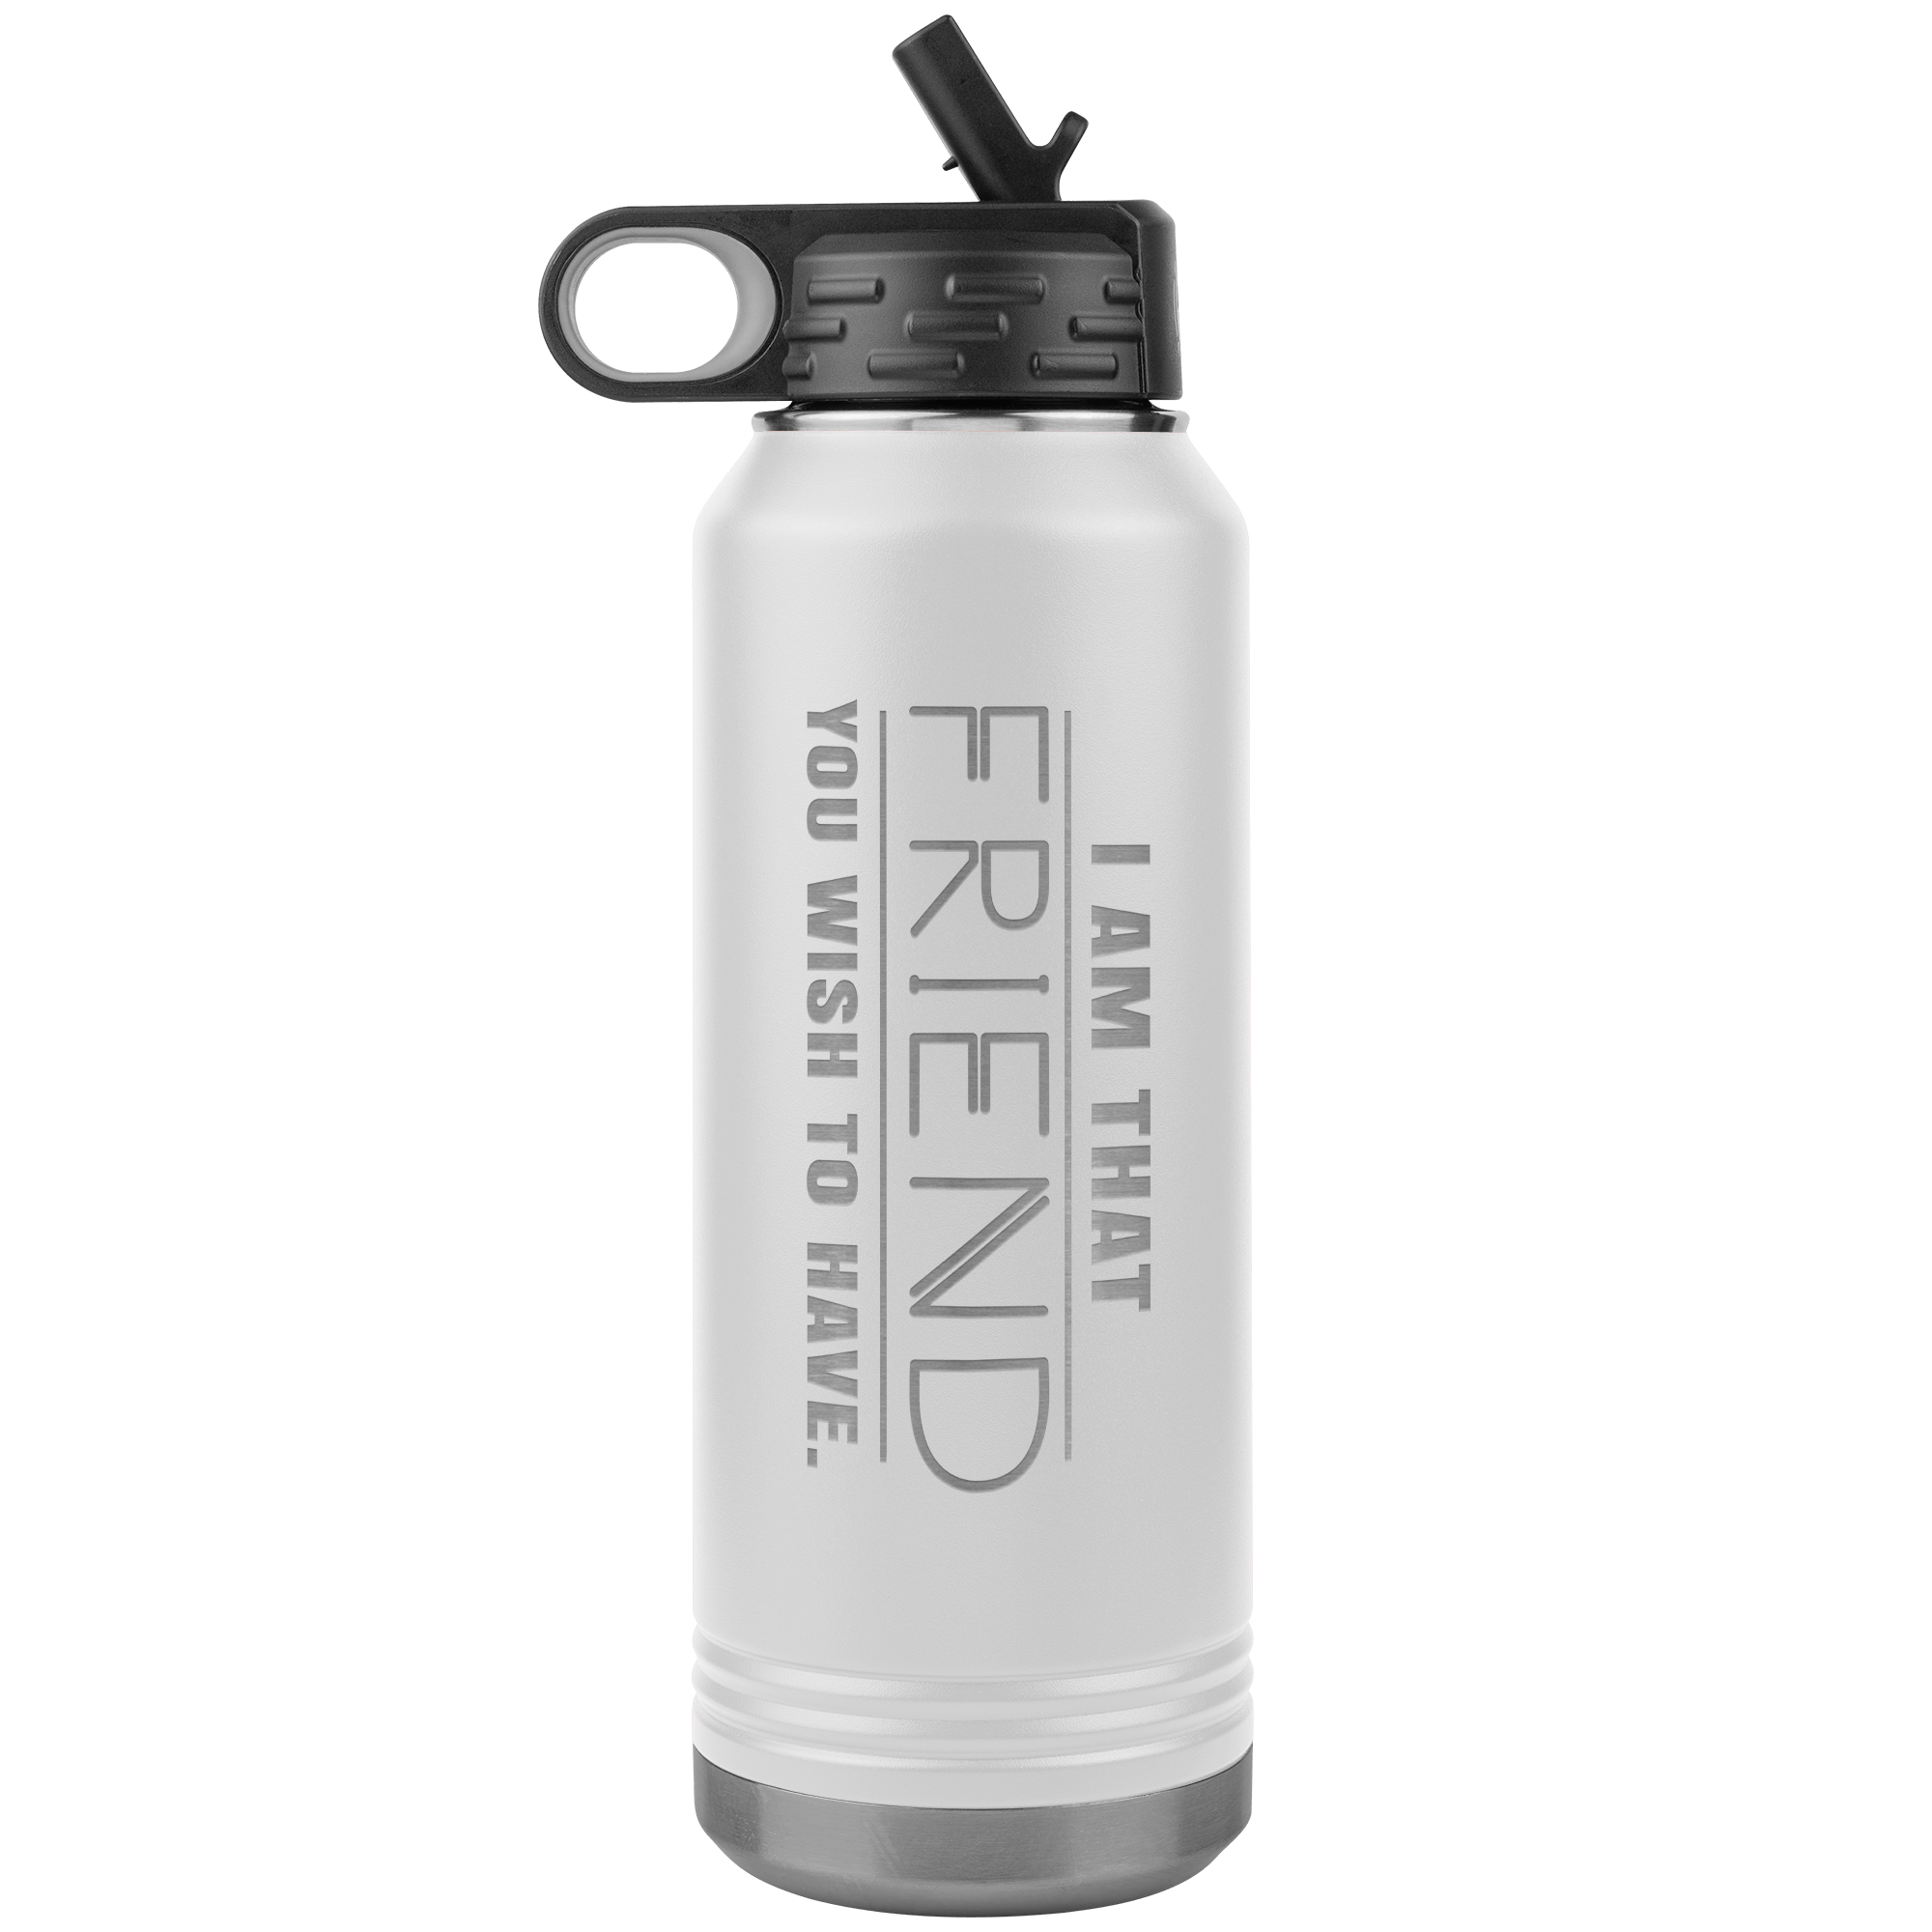 "I am that Friend you want to have", Water Bottle.